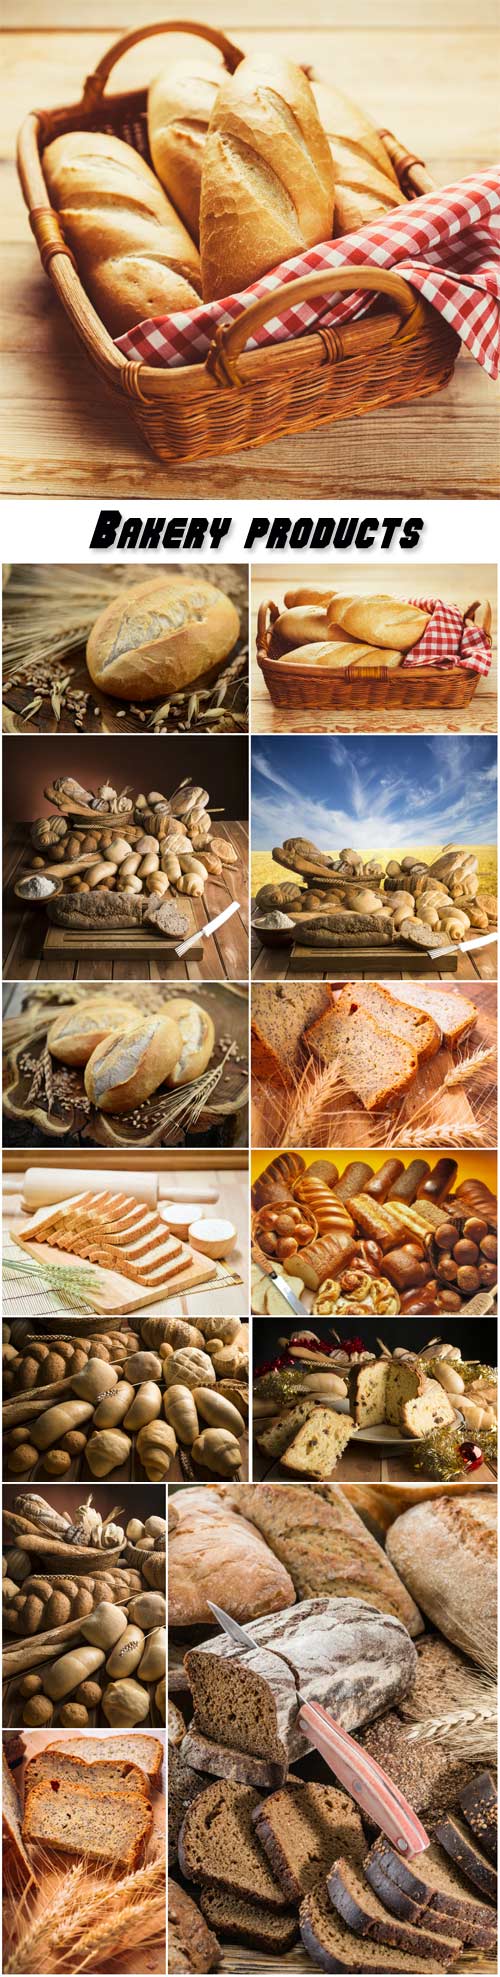 Bakery products, bread in a basket